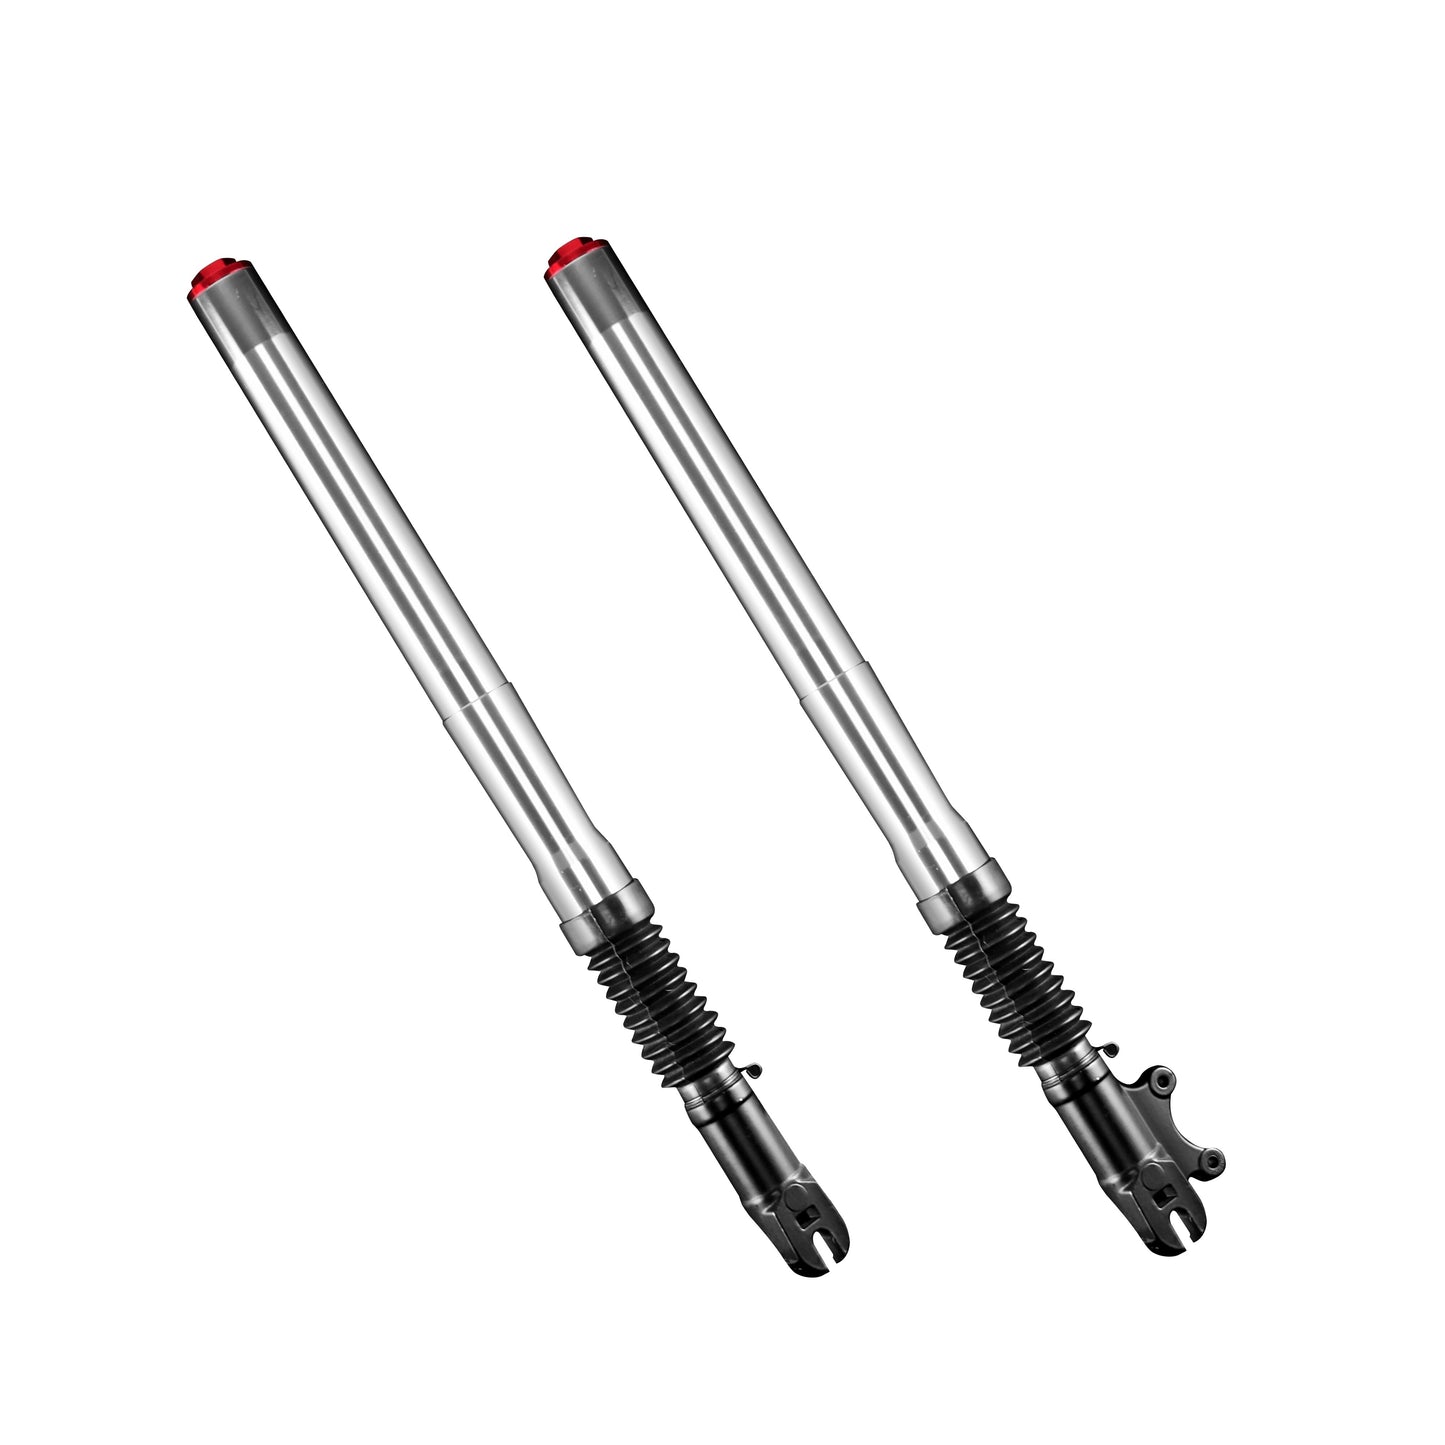 Generic Silver Steel of Two Front Shock-Absorbing Cylinders Suspension for S3 Boyueda Electric Scooter Zubehörteile